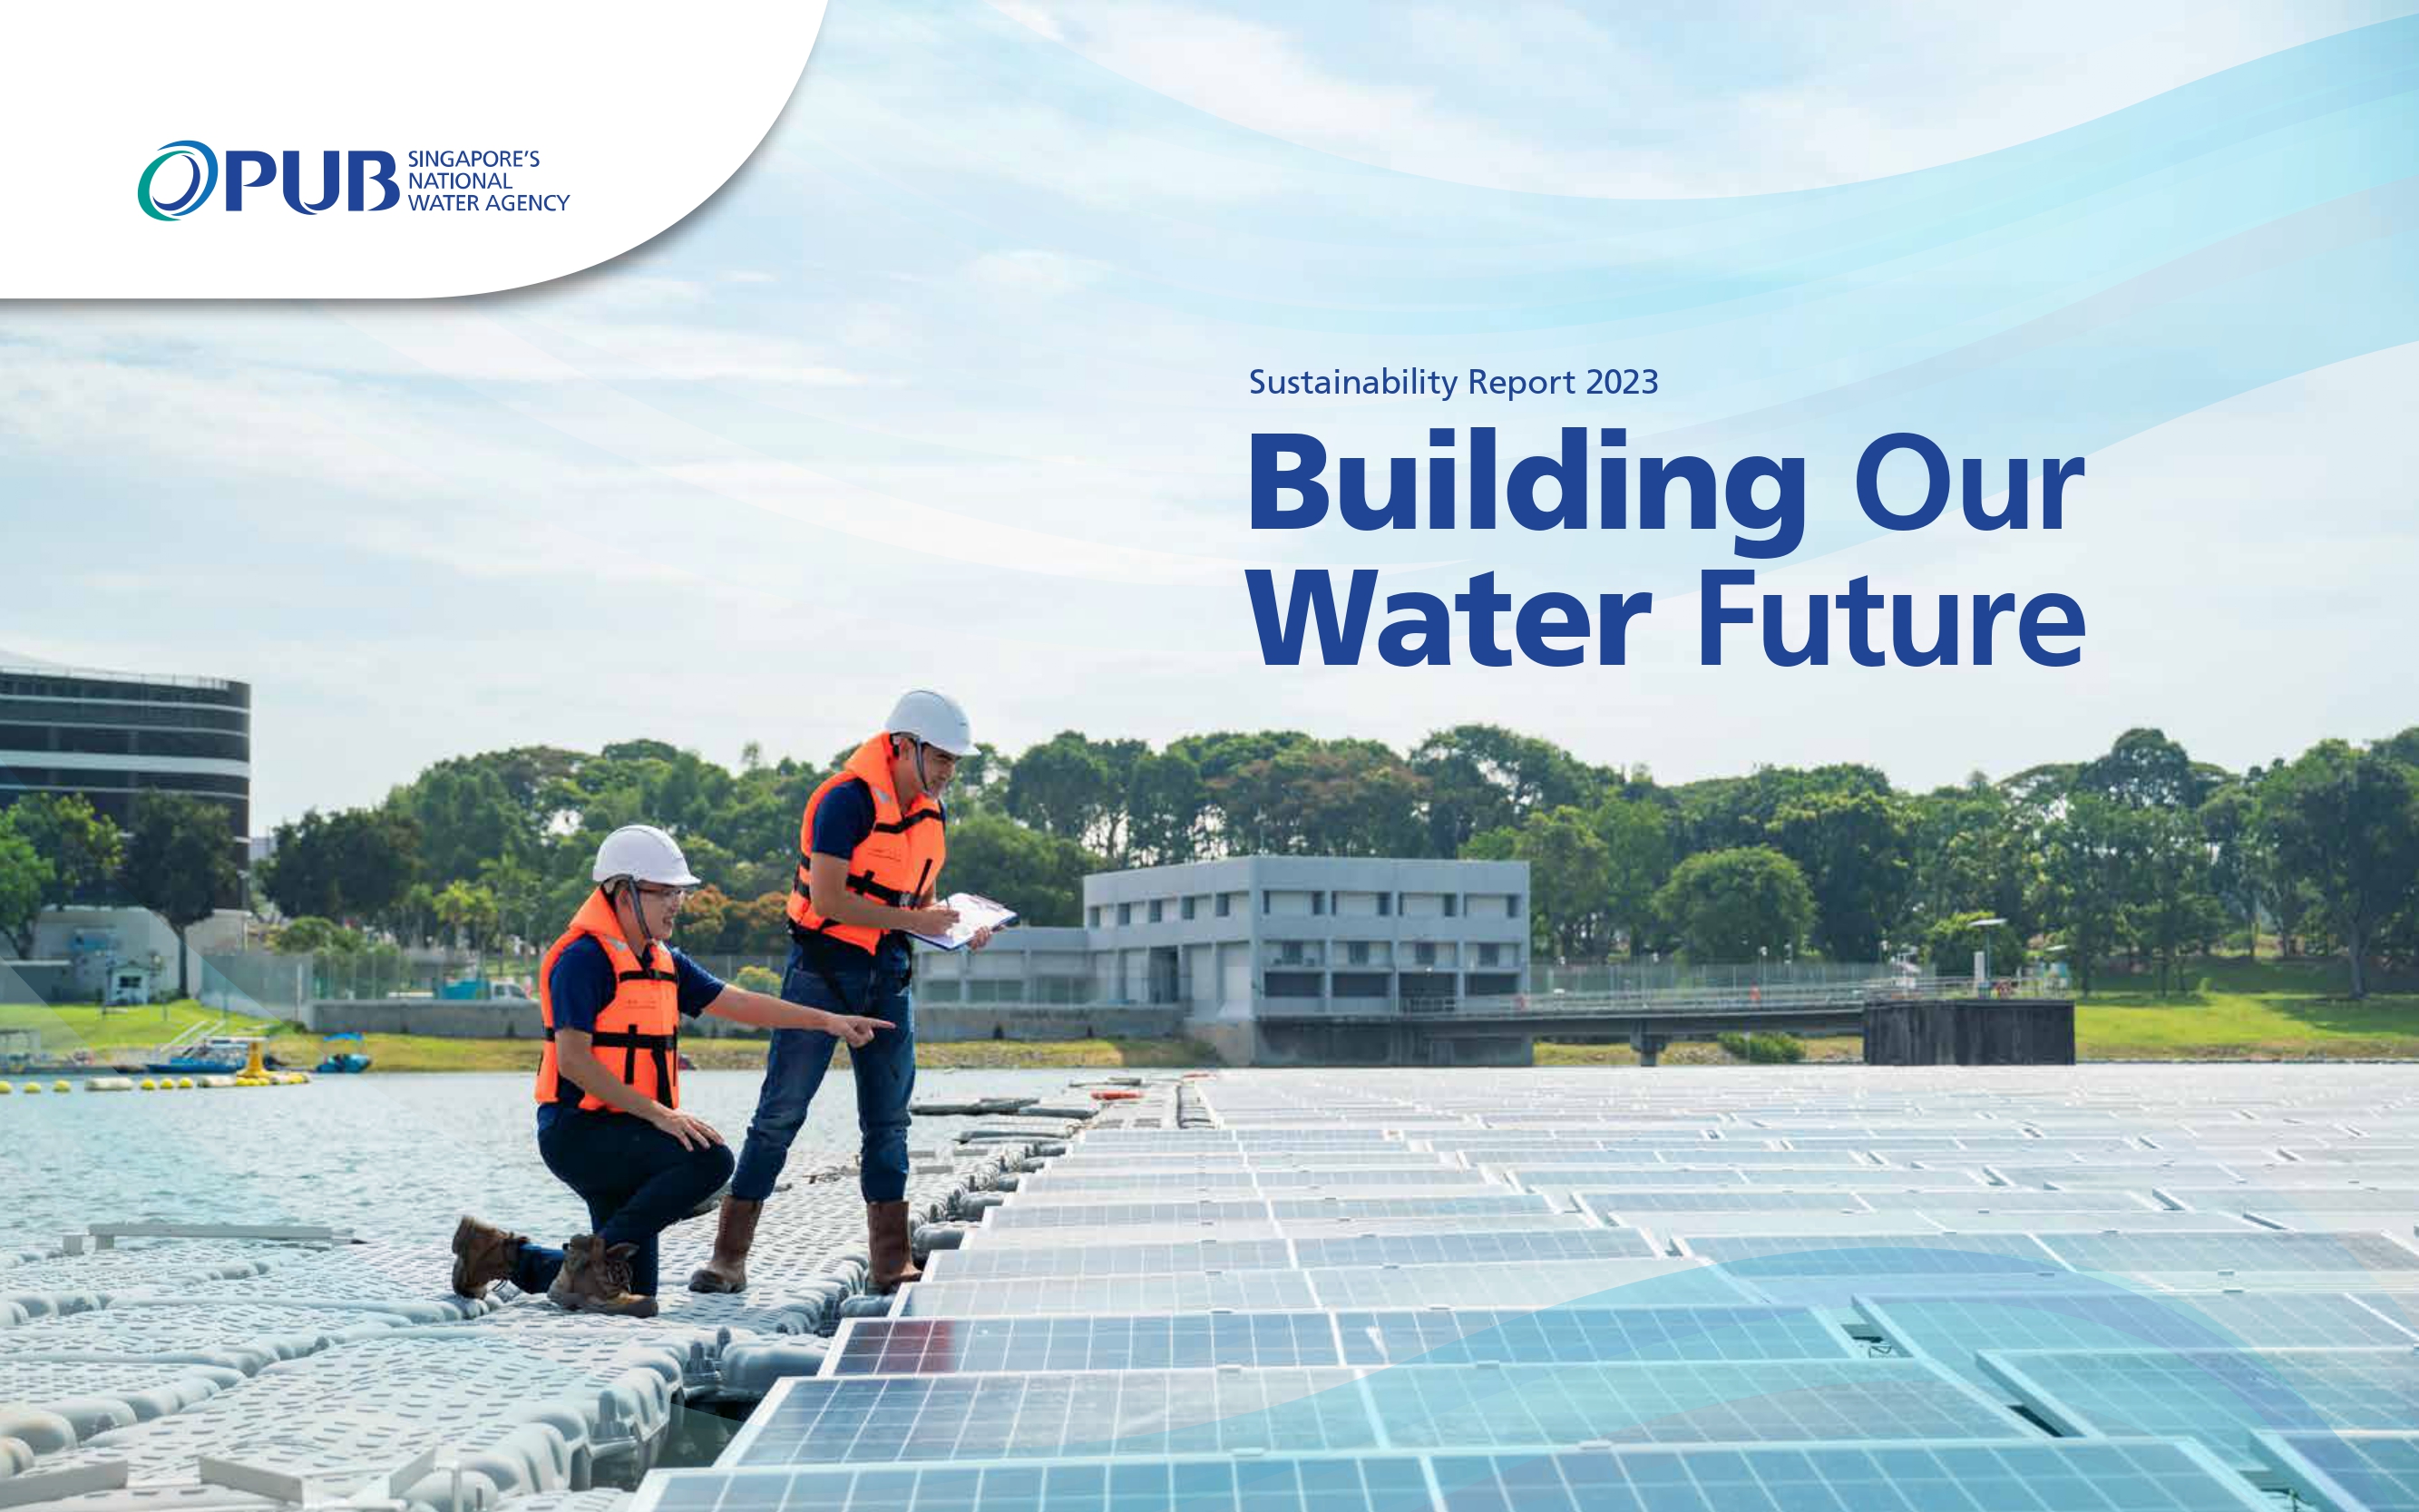 Sustainabillity Report 2023 - Building Our Water Future